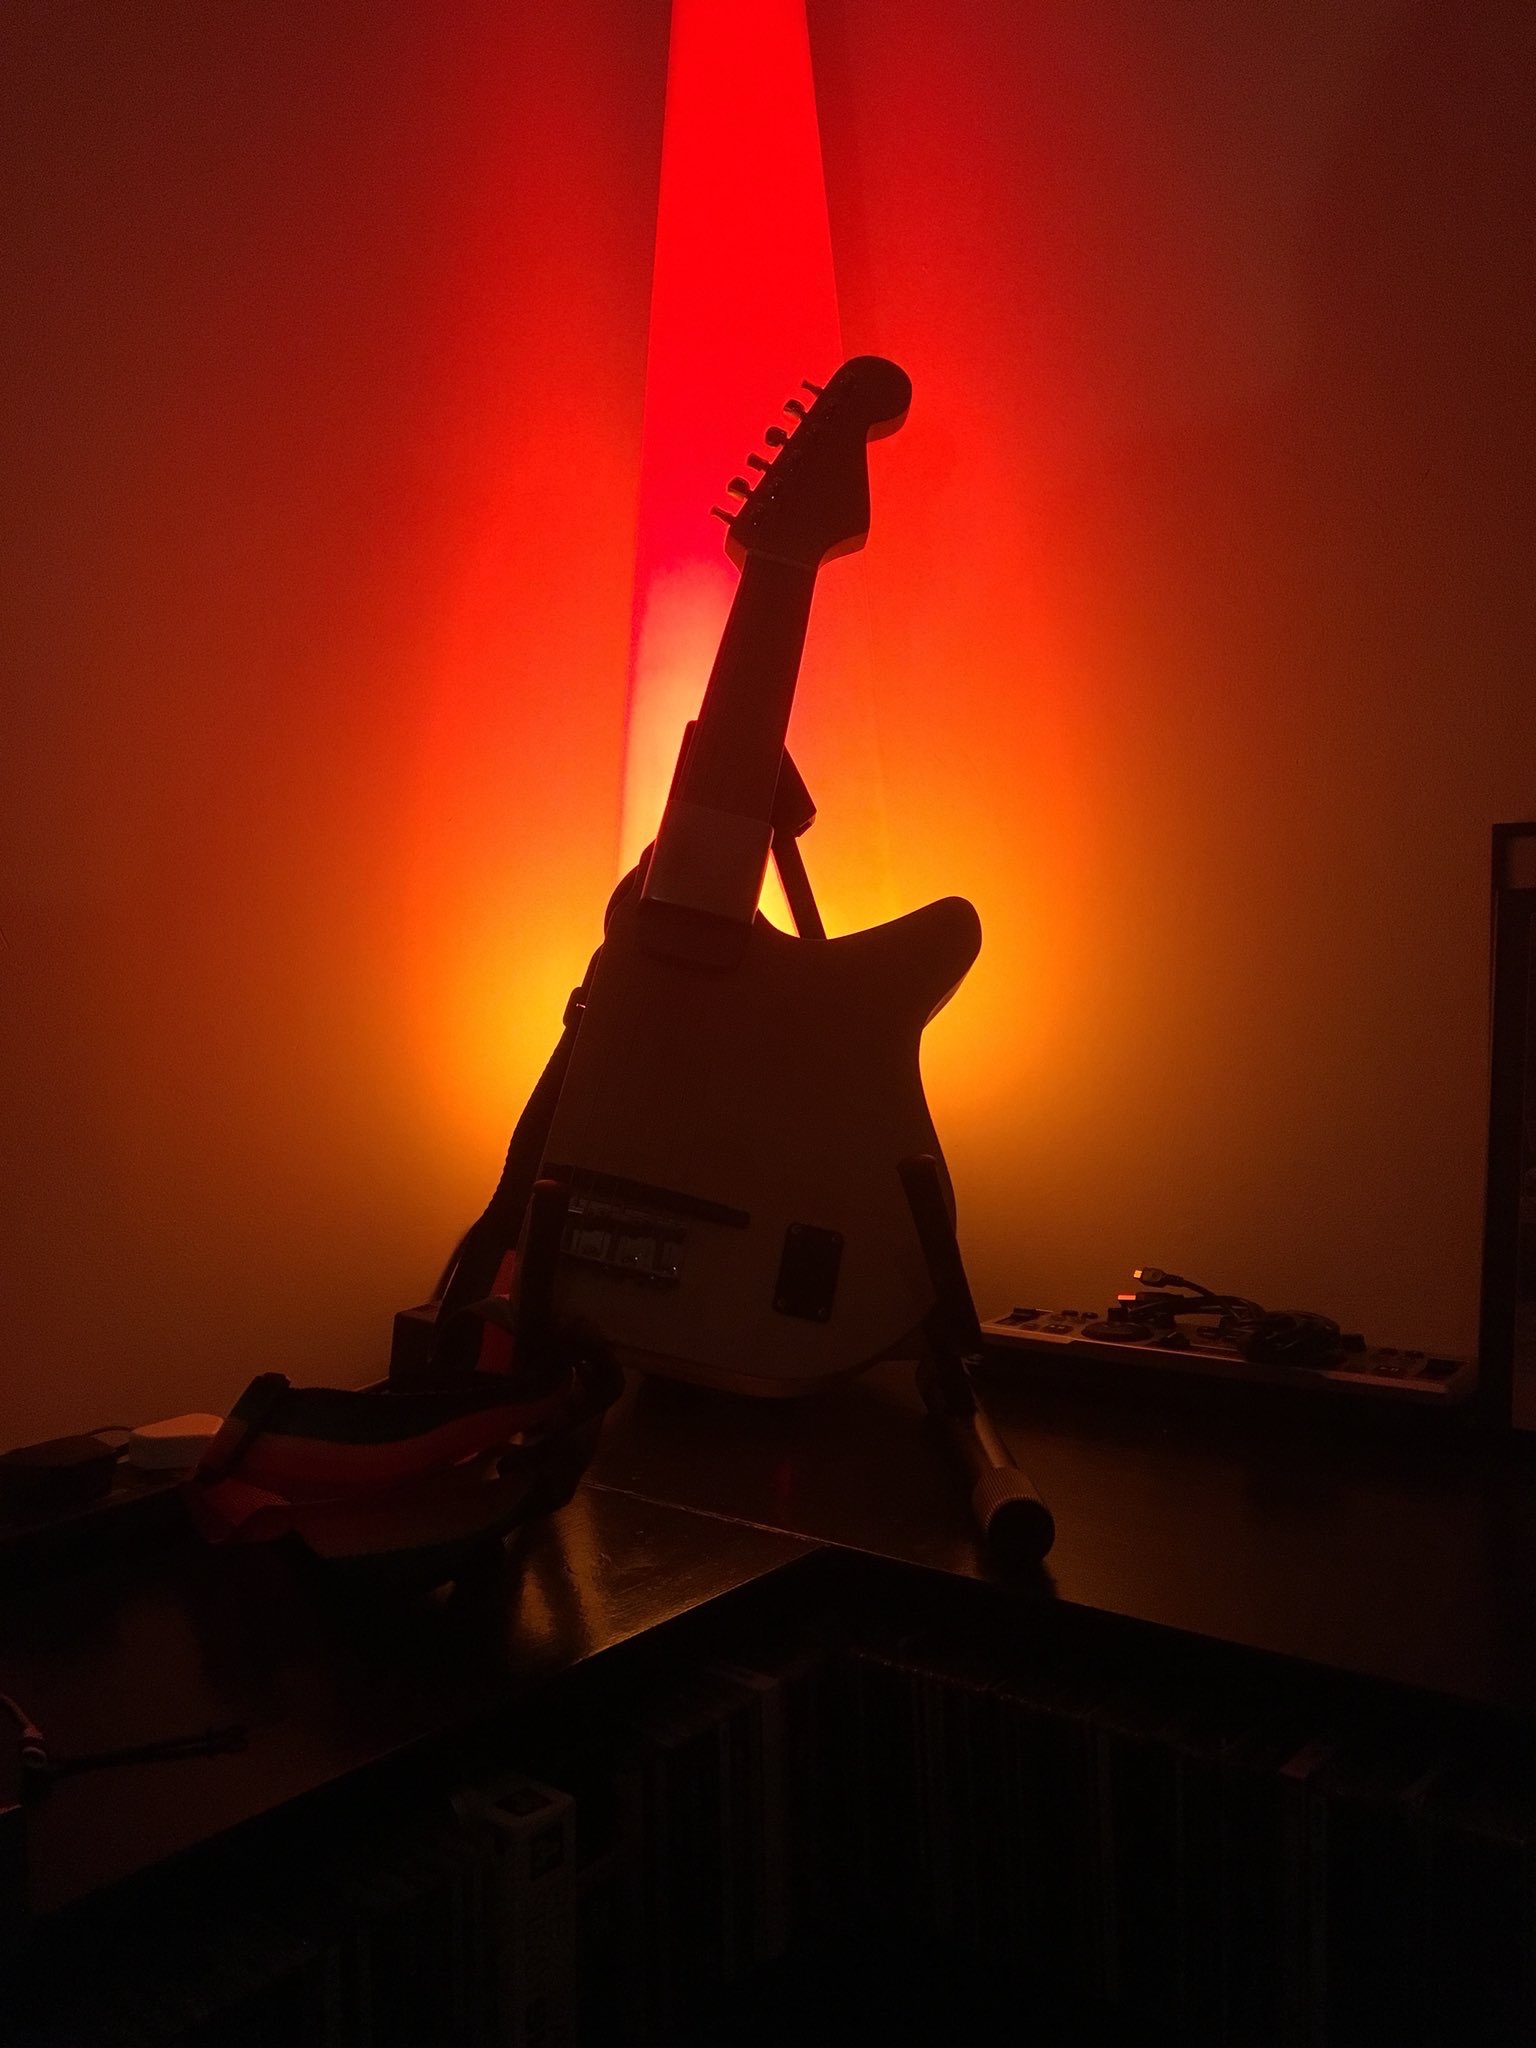 The Kellycaster shadow with orange/red backlight.